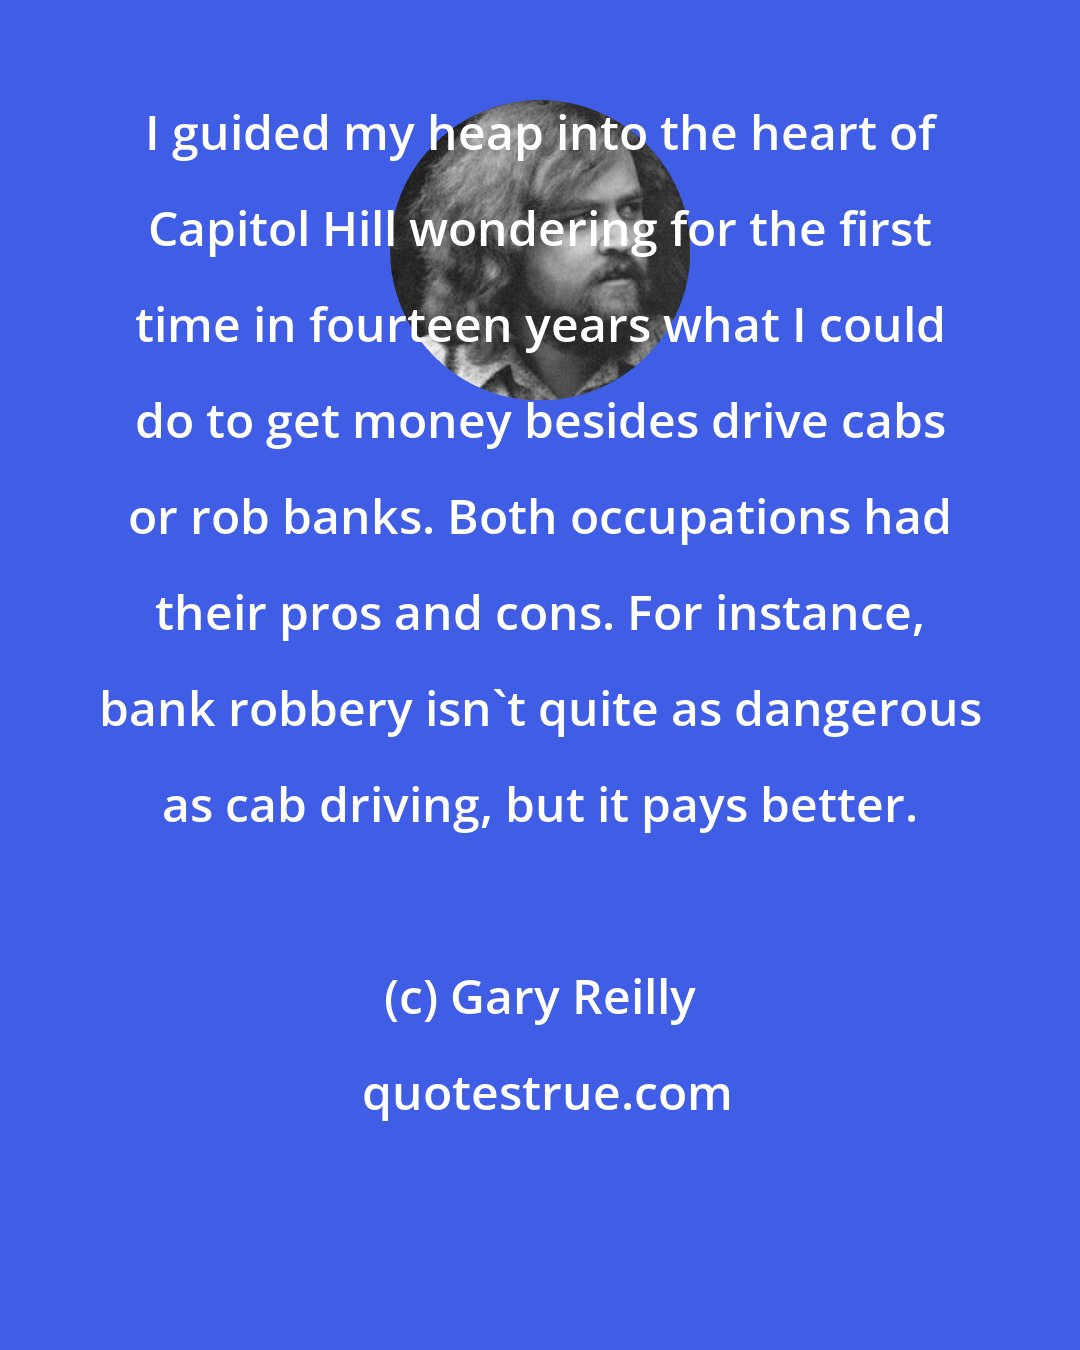 Gary Reilly: I guided my heap into the heart of Capitol Hill wondering for the first time in fourteen years what I could do to get money besides drive cabs or rob banks. Both occupations had their pros and cons. For instance, bank robbery isn't quite as dangerous as cab driving, but it pays better.